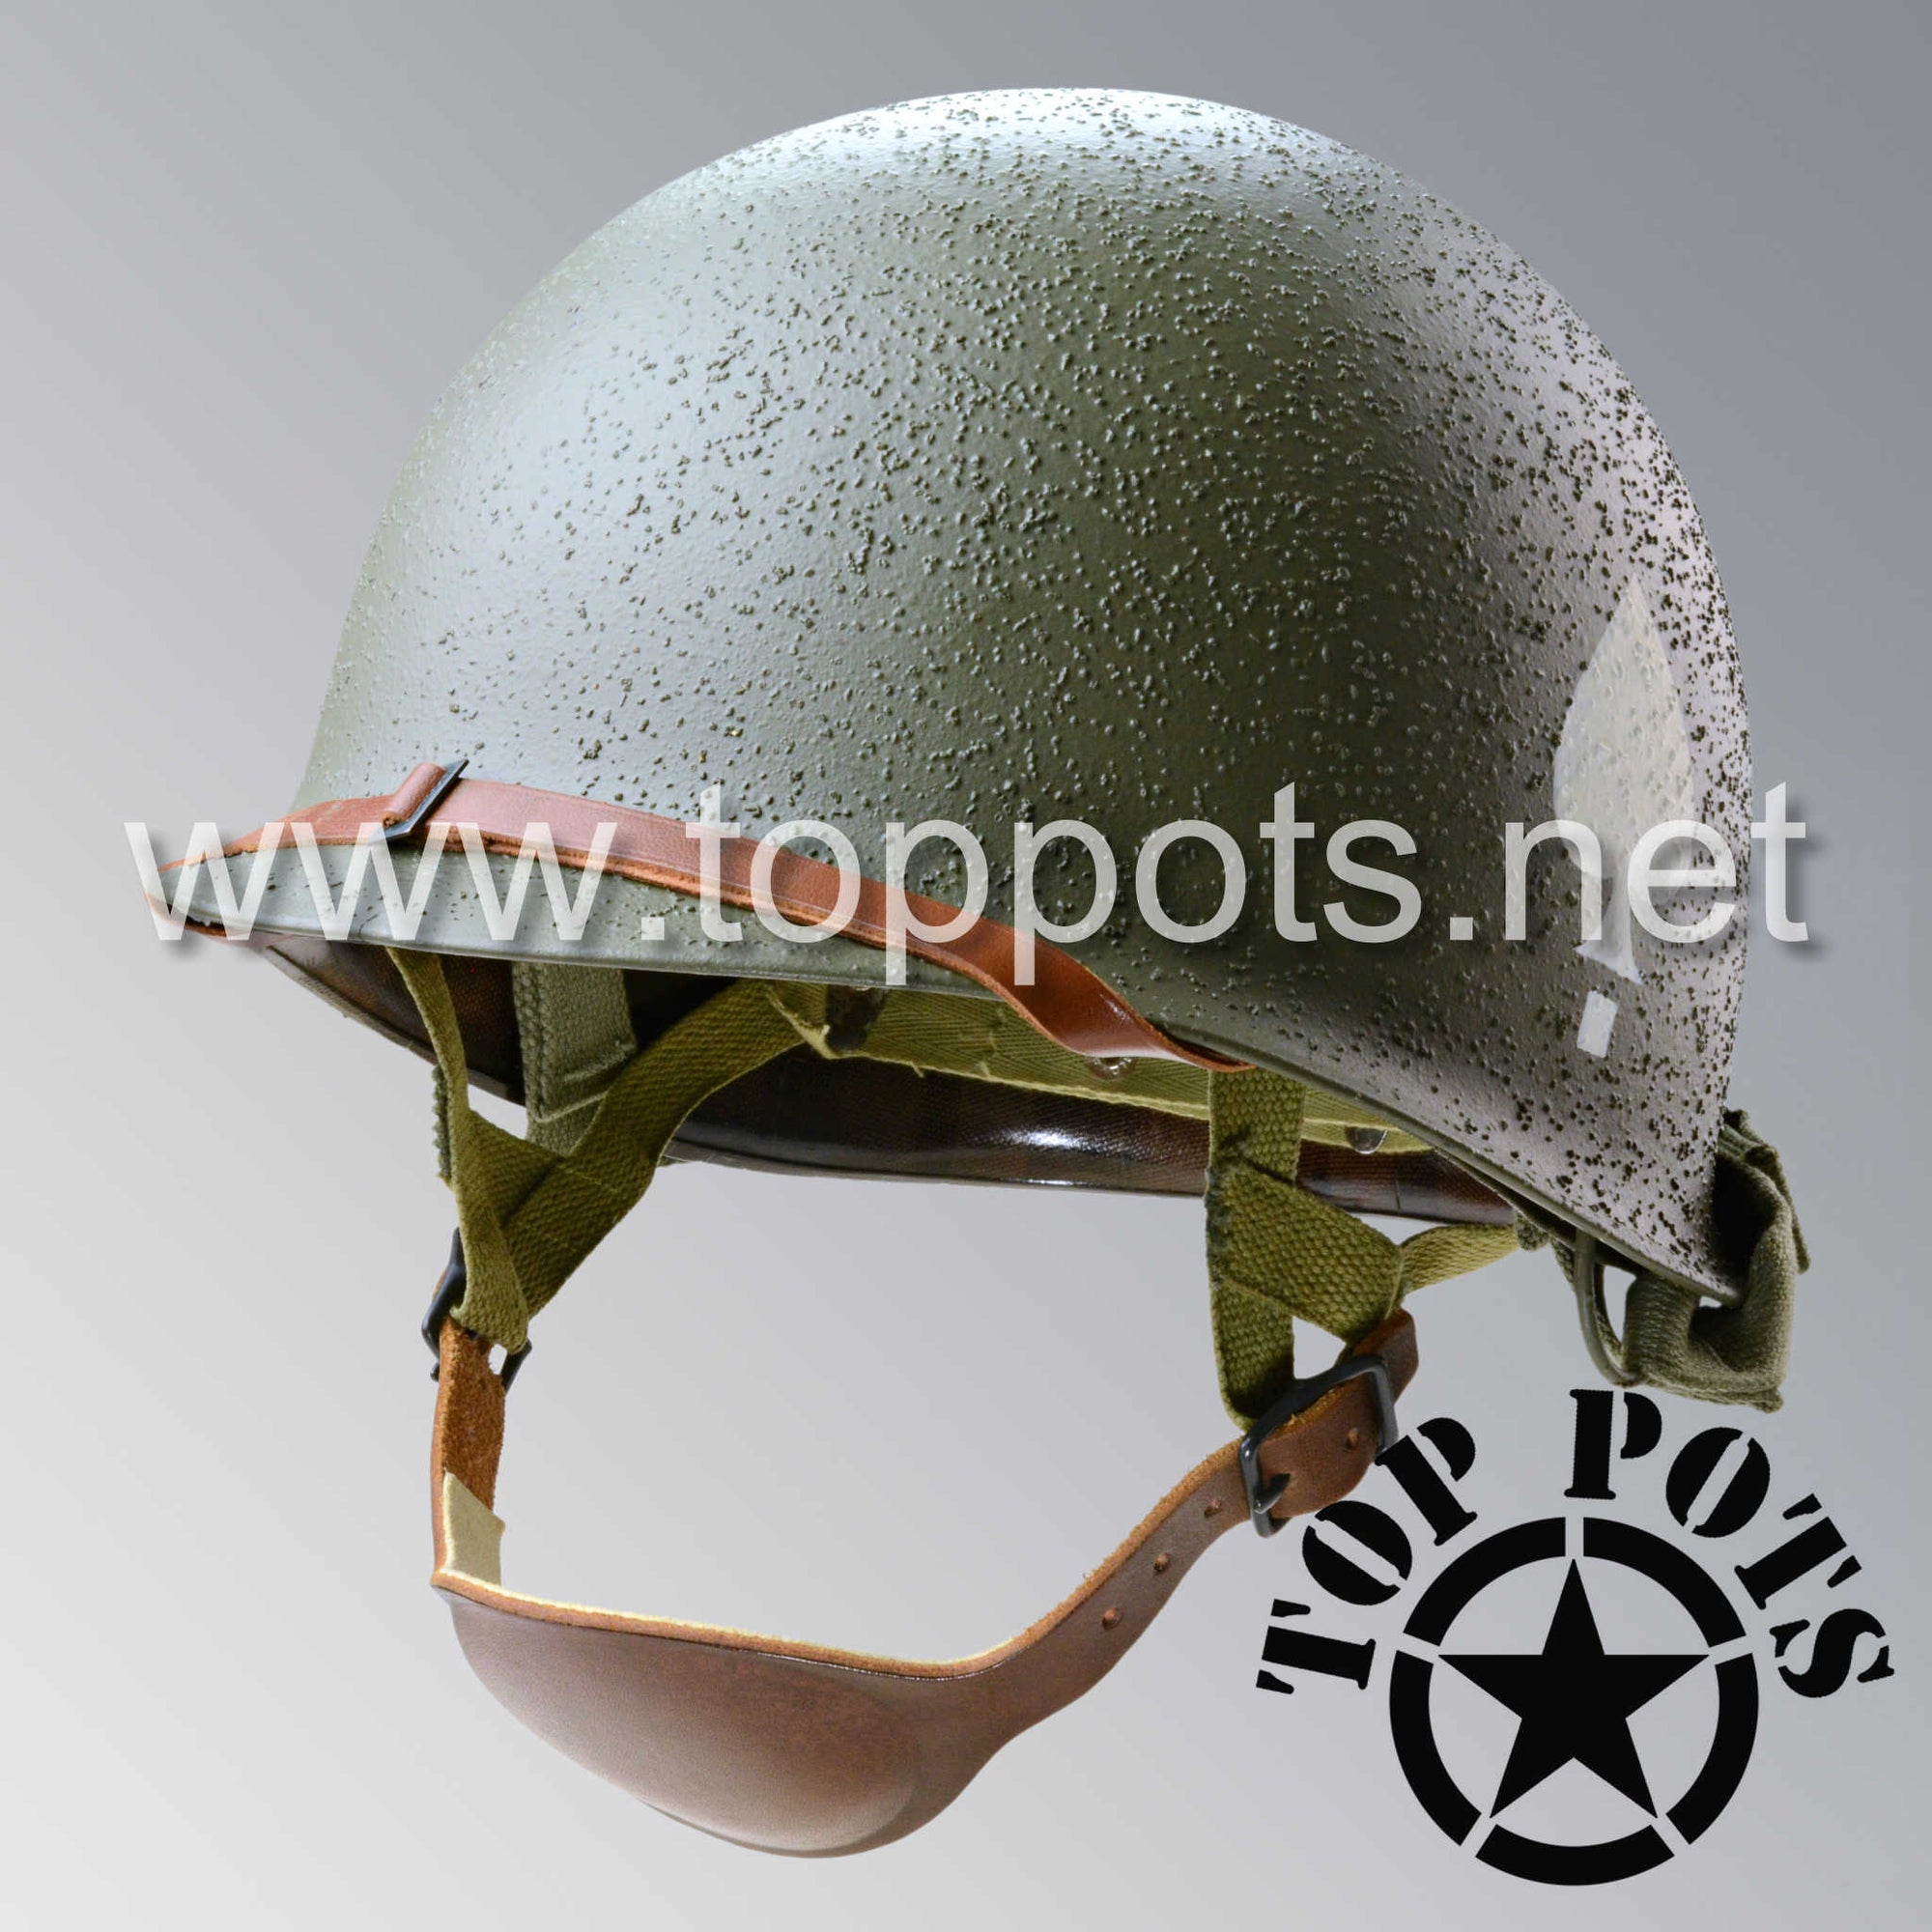 WWII US Army Restored Original M2 Paratrooper Airborne Helmet D Bale Shell and Liner with 506th 2nd Battalion PIR Emblem with Early War Leather Chinstrap